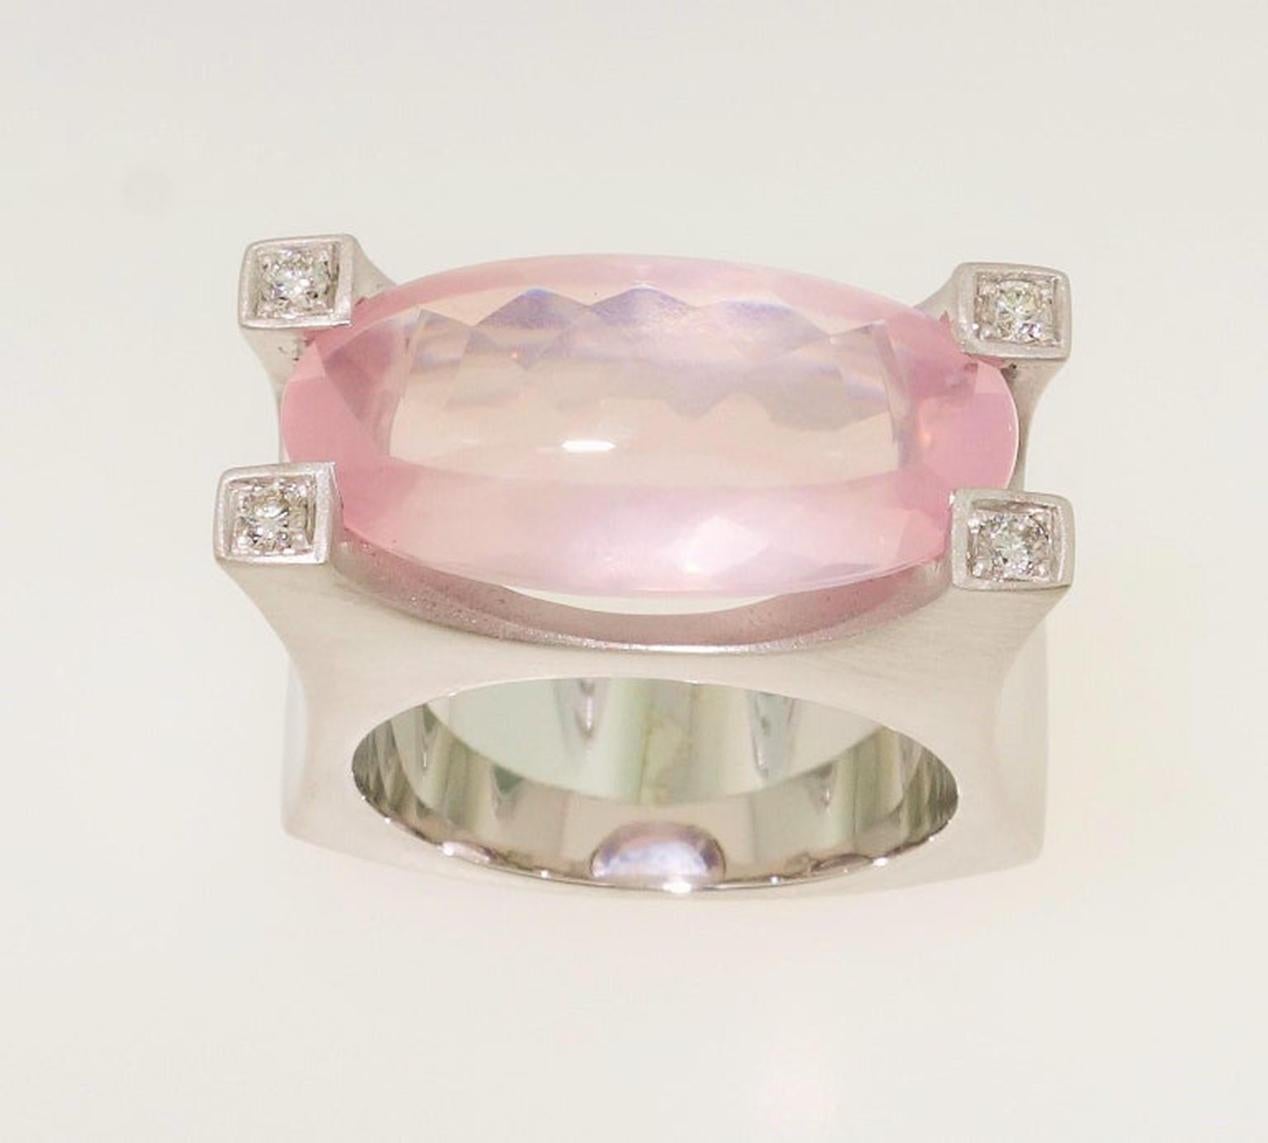 Stunning solitaire Cocktail ring featuring a 8.48 Carat oval Buff-Top Rose Quartz measuring approx. 20mm x 10mm; each corner enhanced with a round Diamond; 4 round Diamonds approx. 0.10 total carat weight; Sterling Silver Tarnish-resistant Rhodium